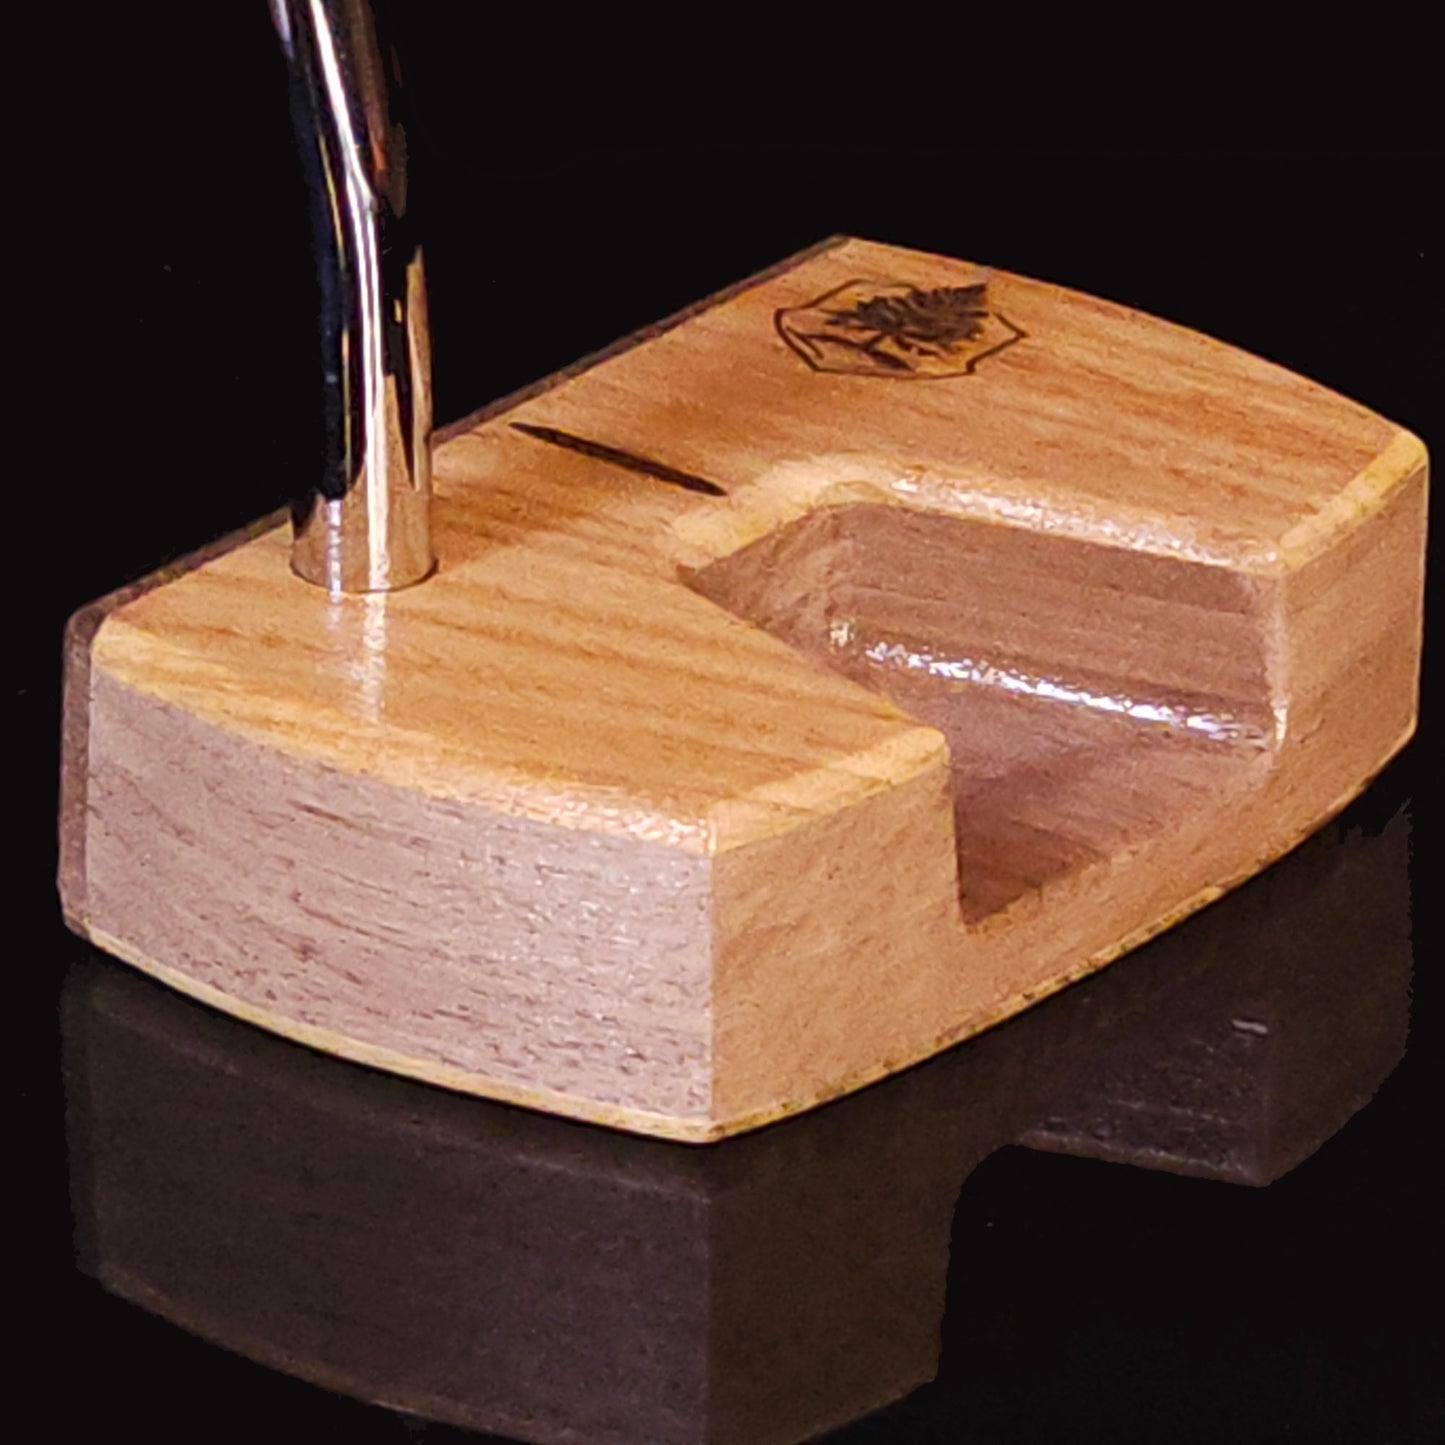 Canarywood walnut and bolivian rosewood Woodrich Regal wood putter